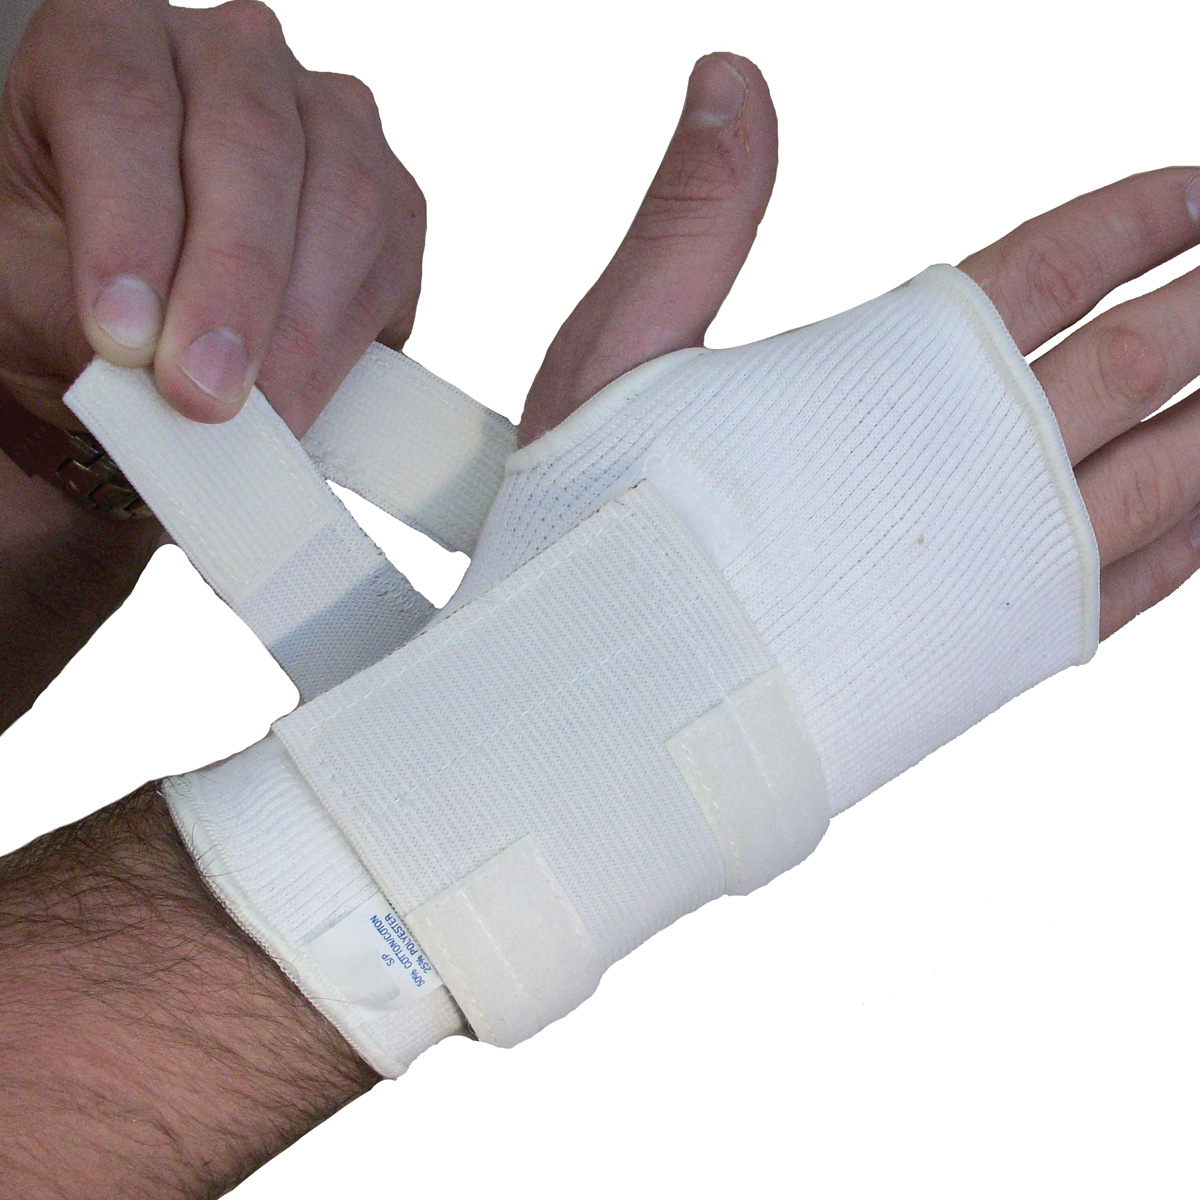 IMPACTO ER1004 LLH WRIST SUPPORT DIMPLE PAD KNIT - Wrist Supports